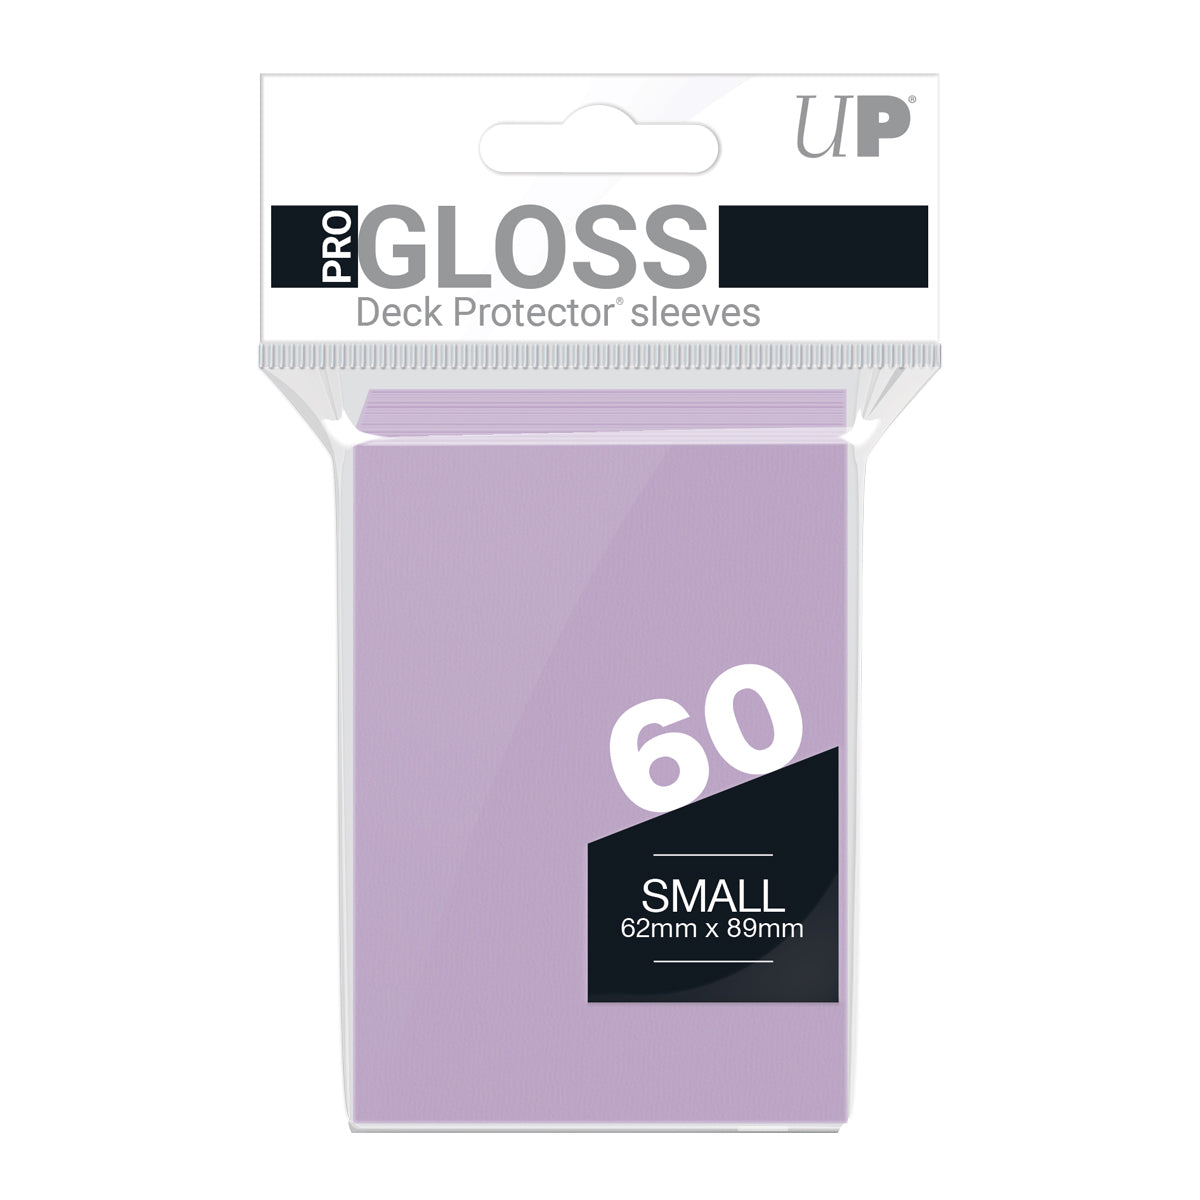 Ultra PRO Card Sleeve Solid Colour Small 60ct - Lilac